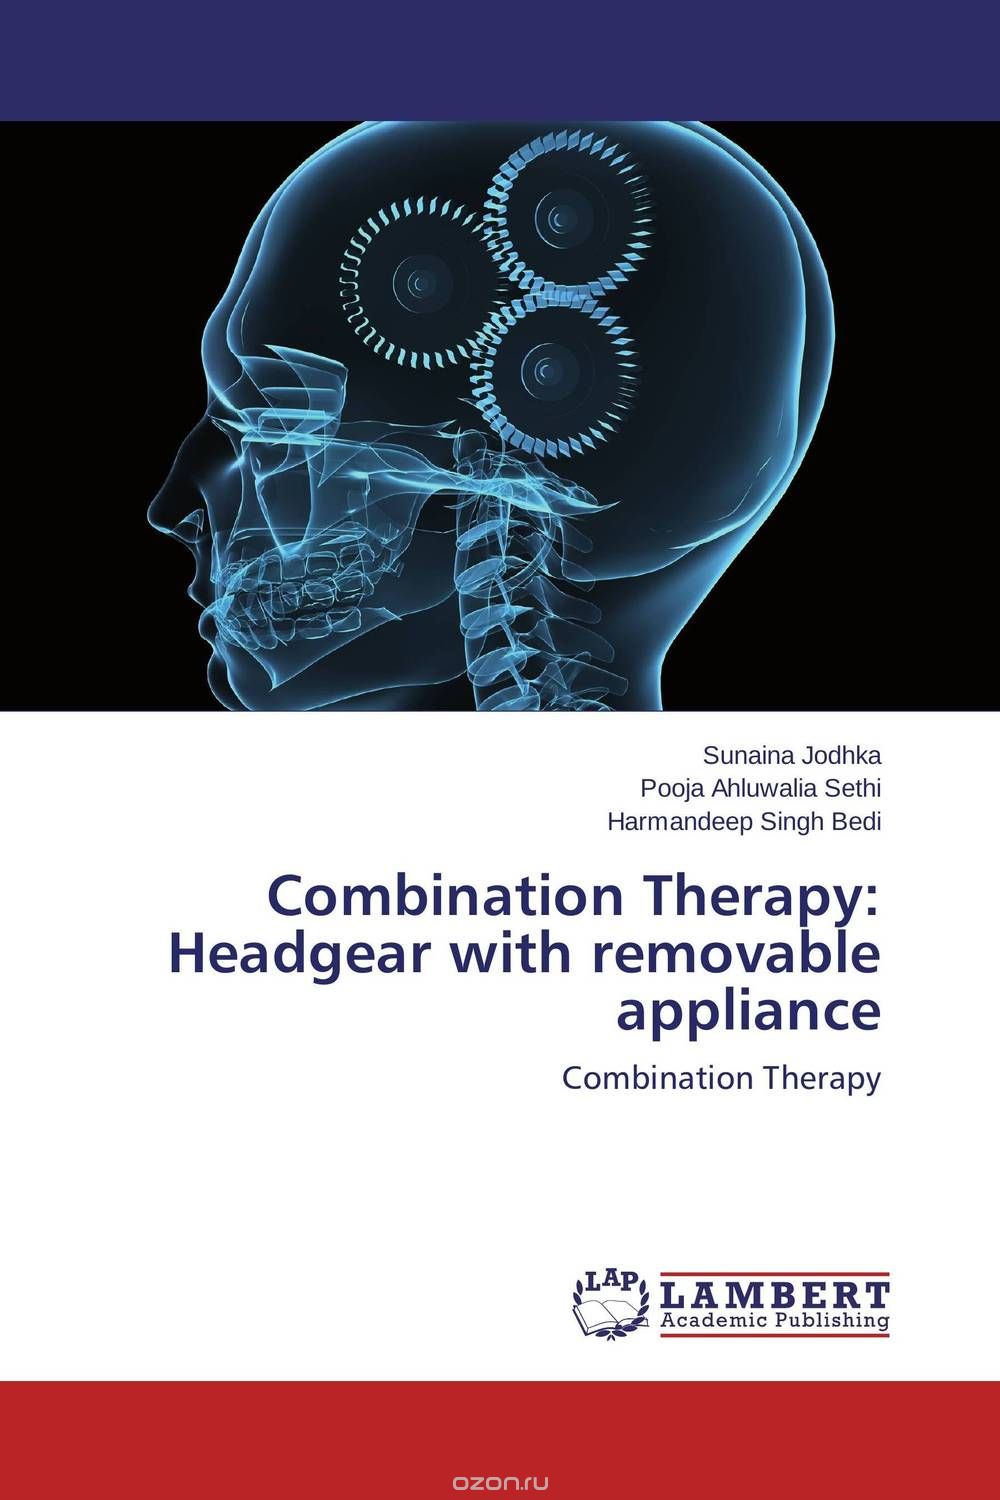 Combination Therapy: Headgear with removable appliance